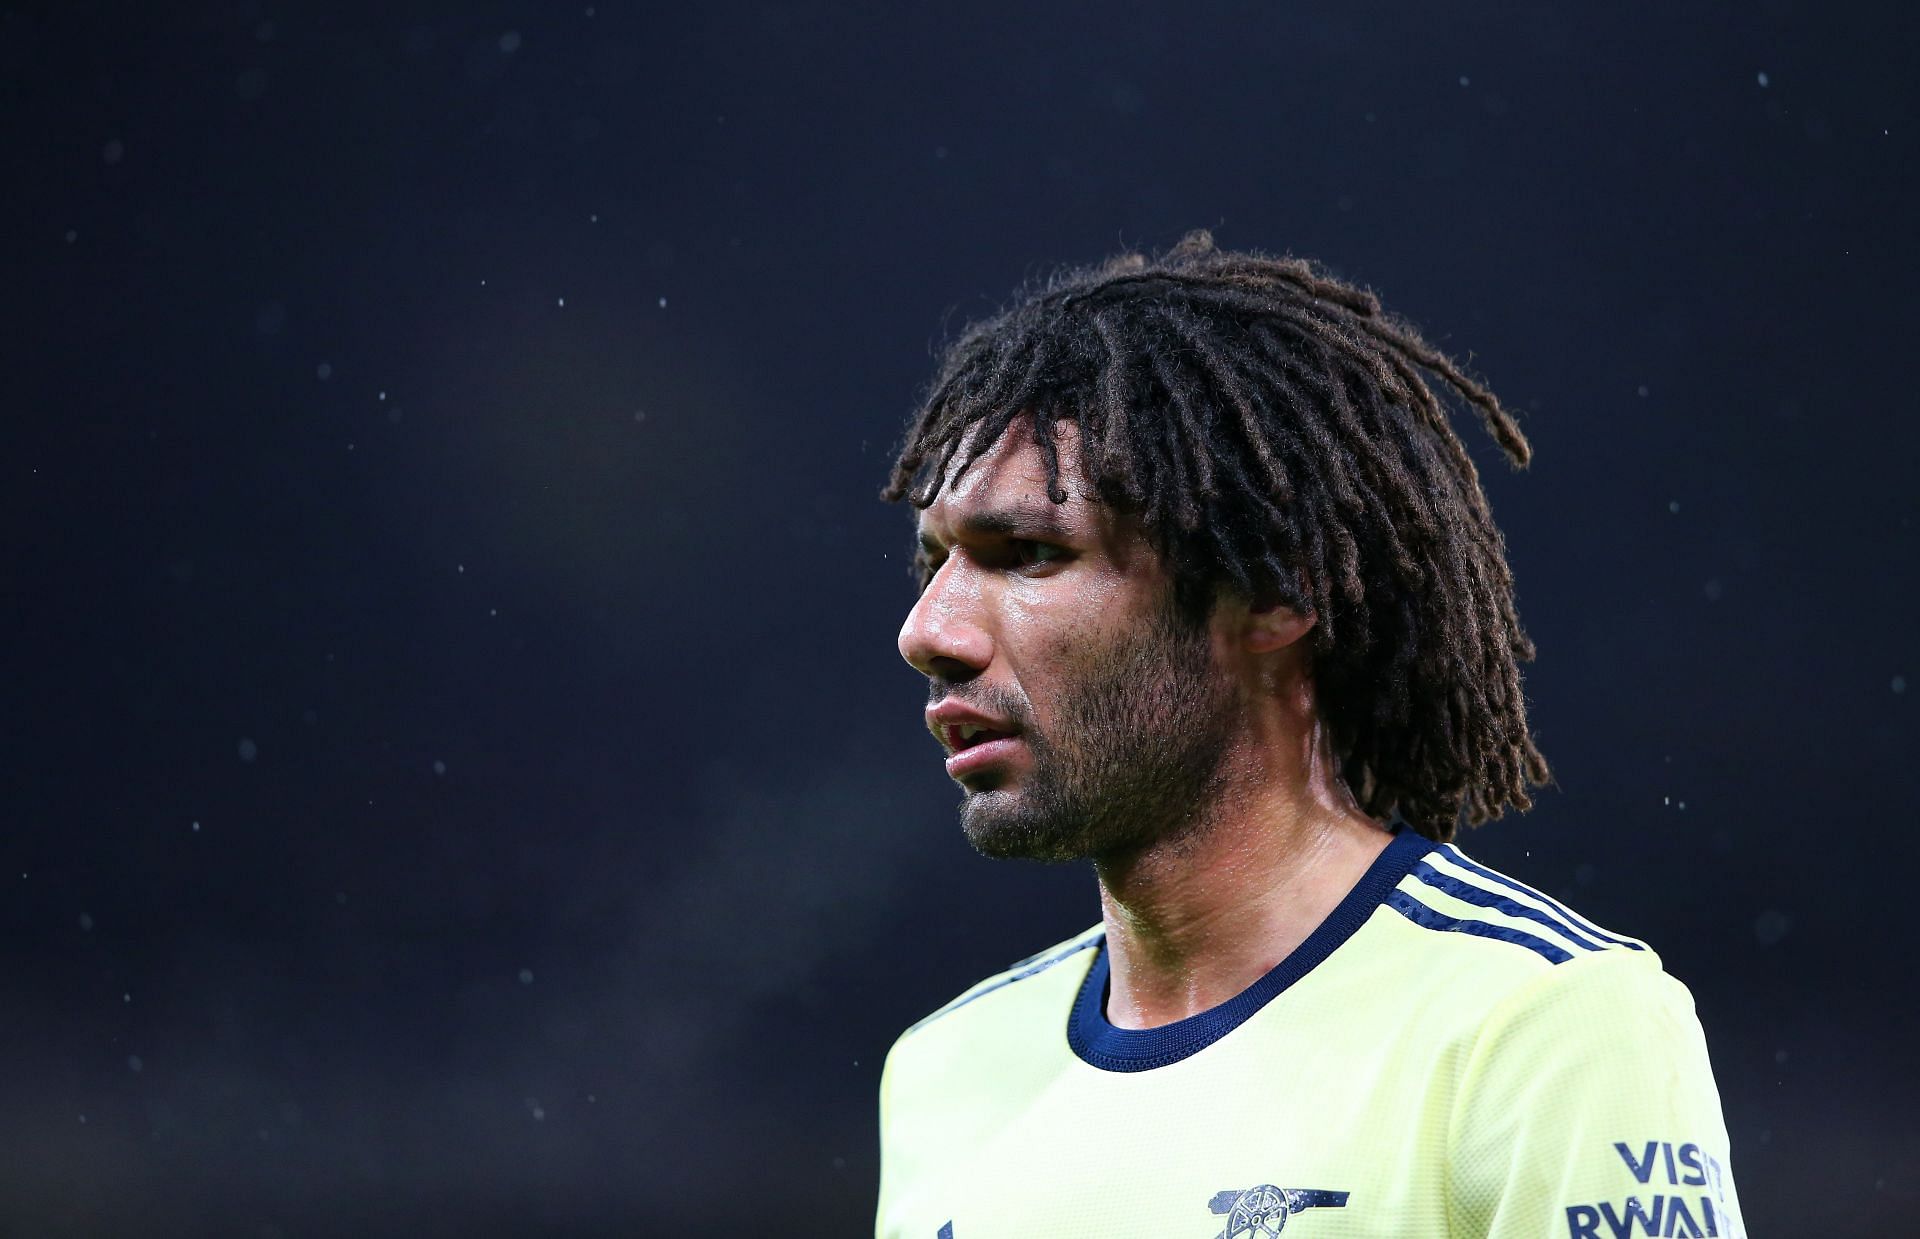 Newcastle United have entered the race to sign Mohamed Elneny.